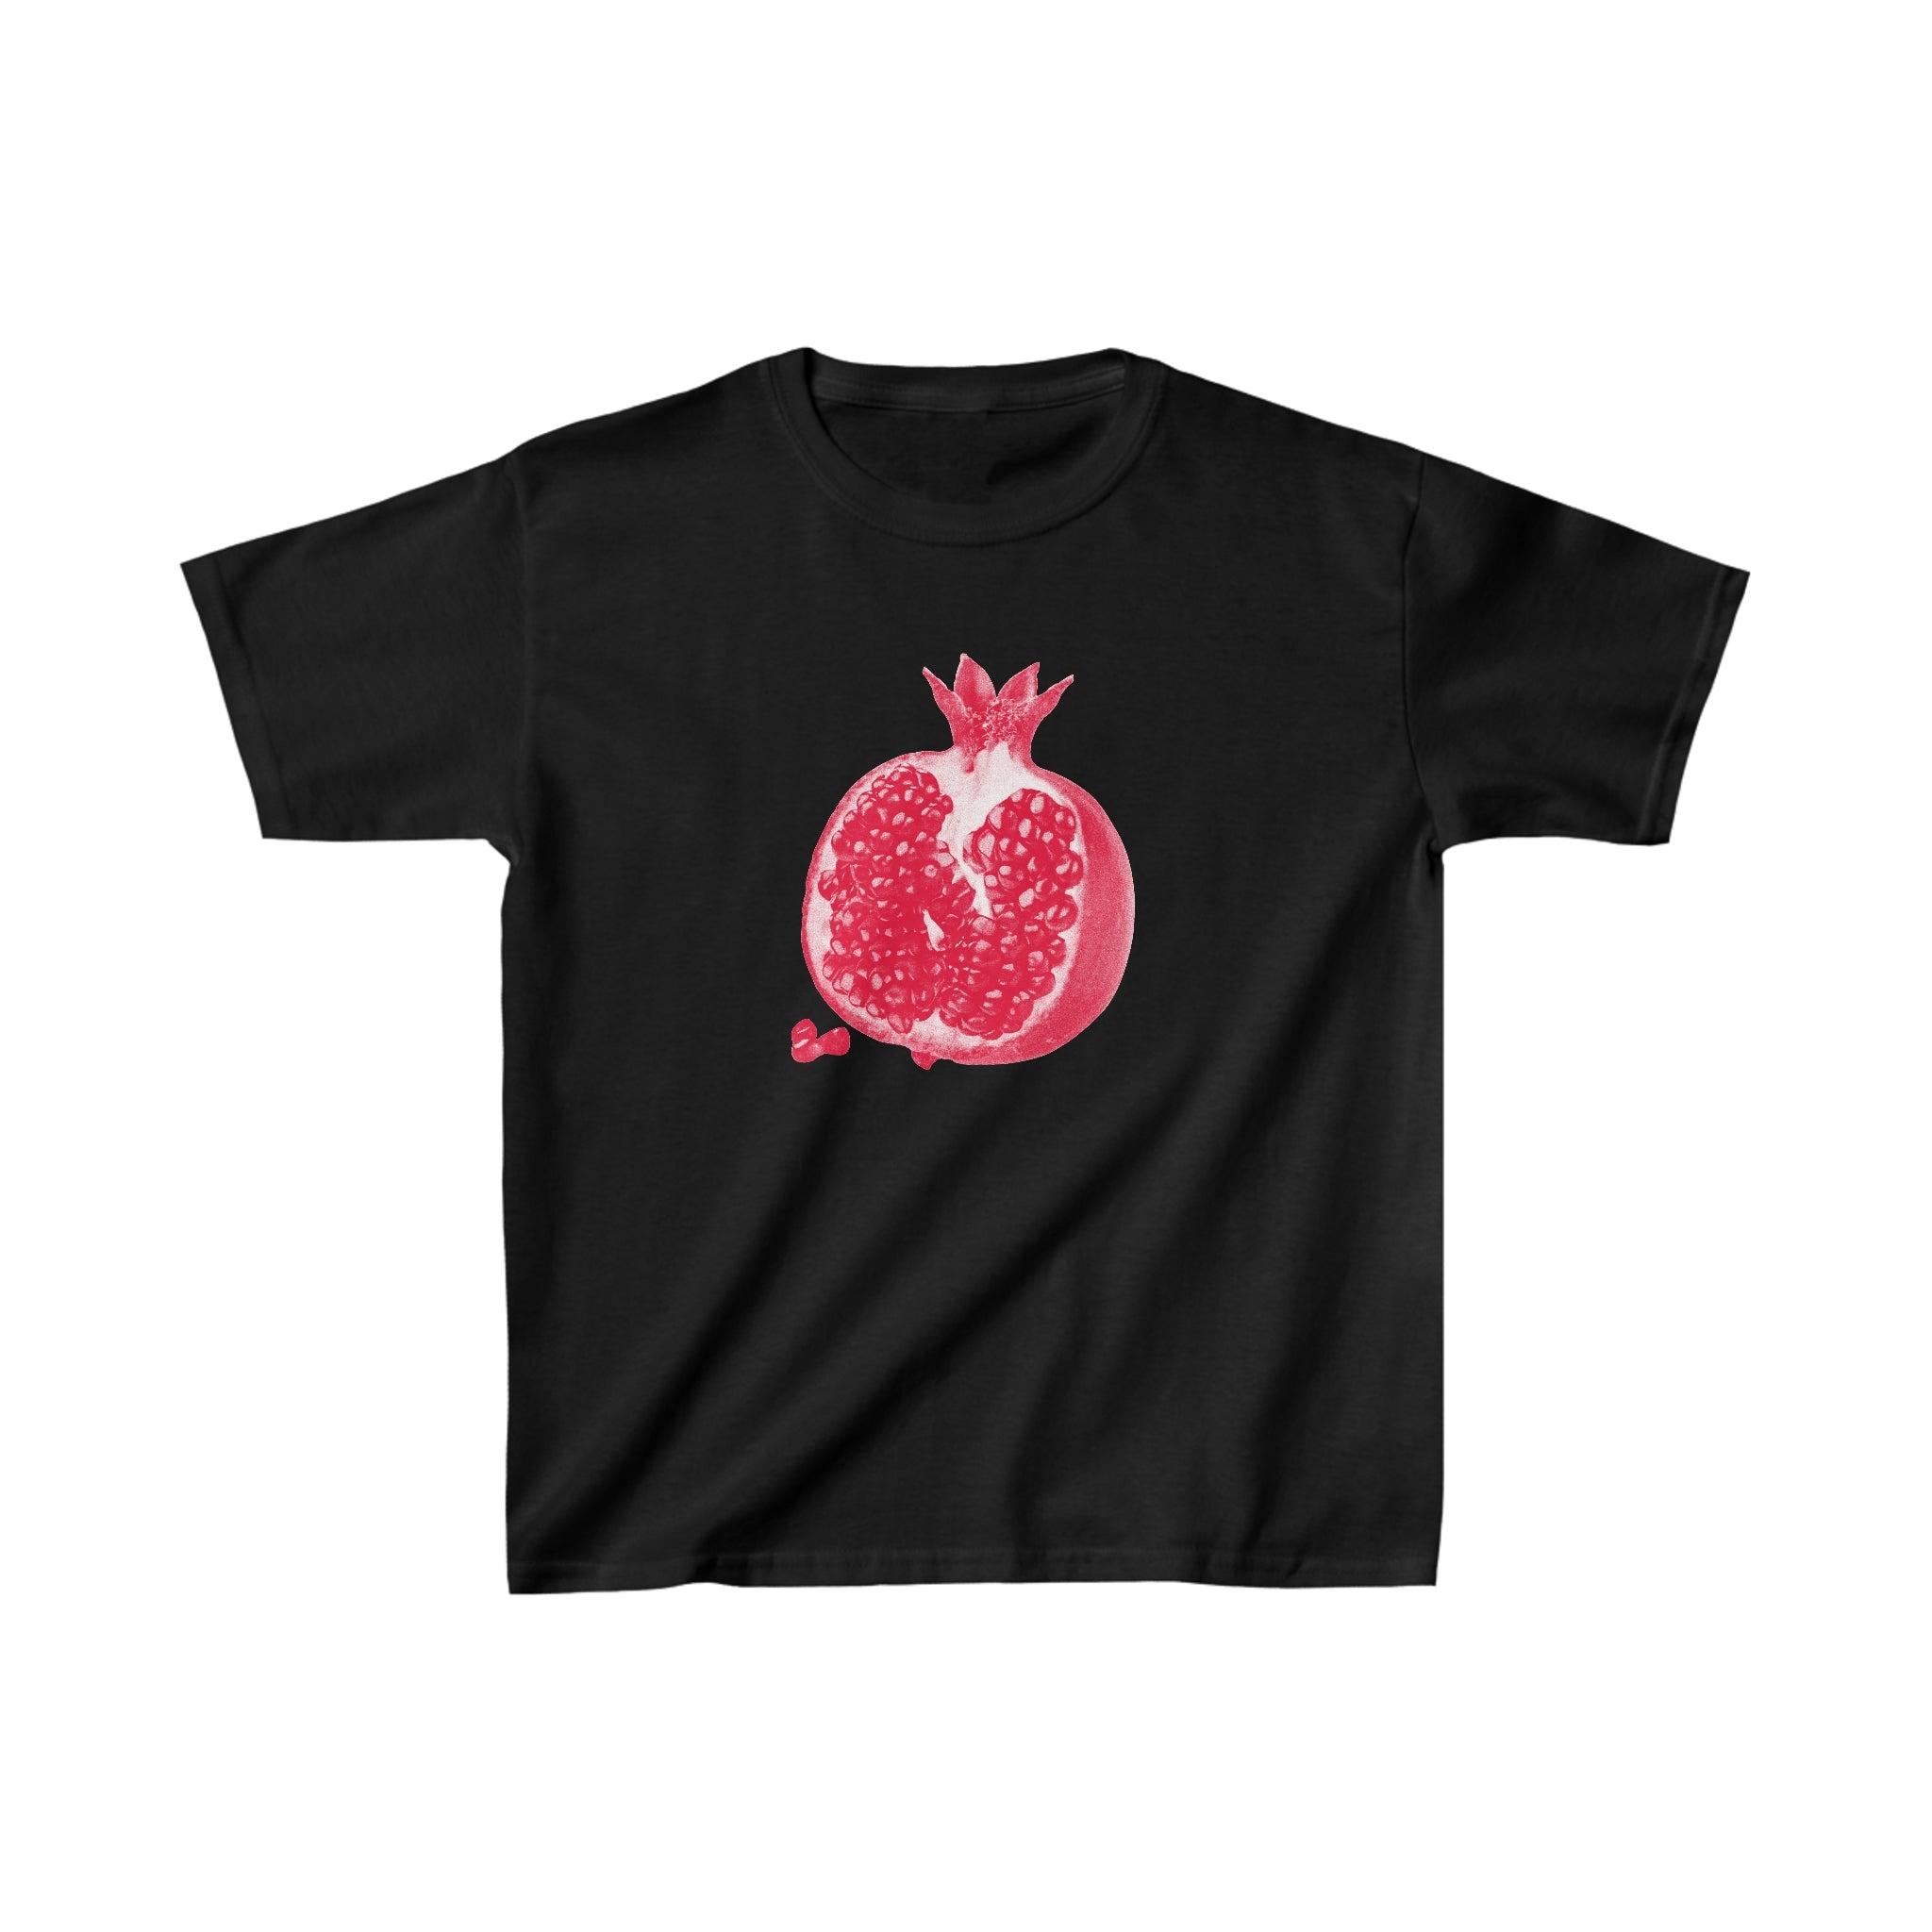 'Pomegranate' baby tee - In Print We Trust